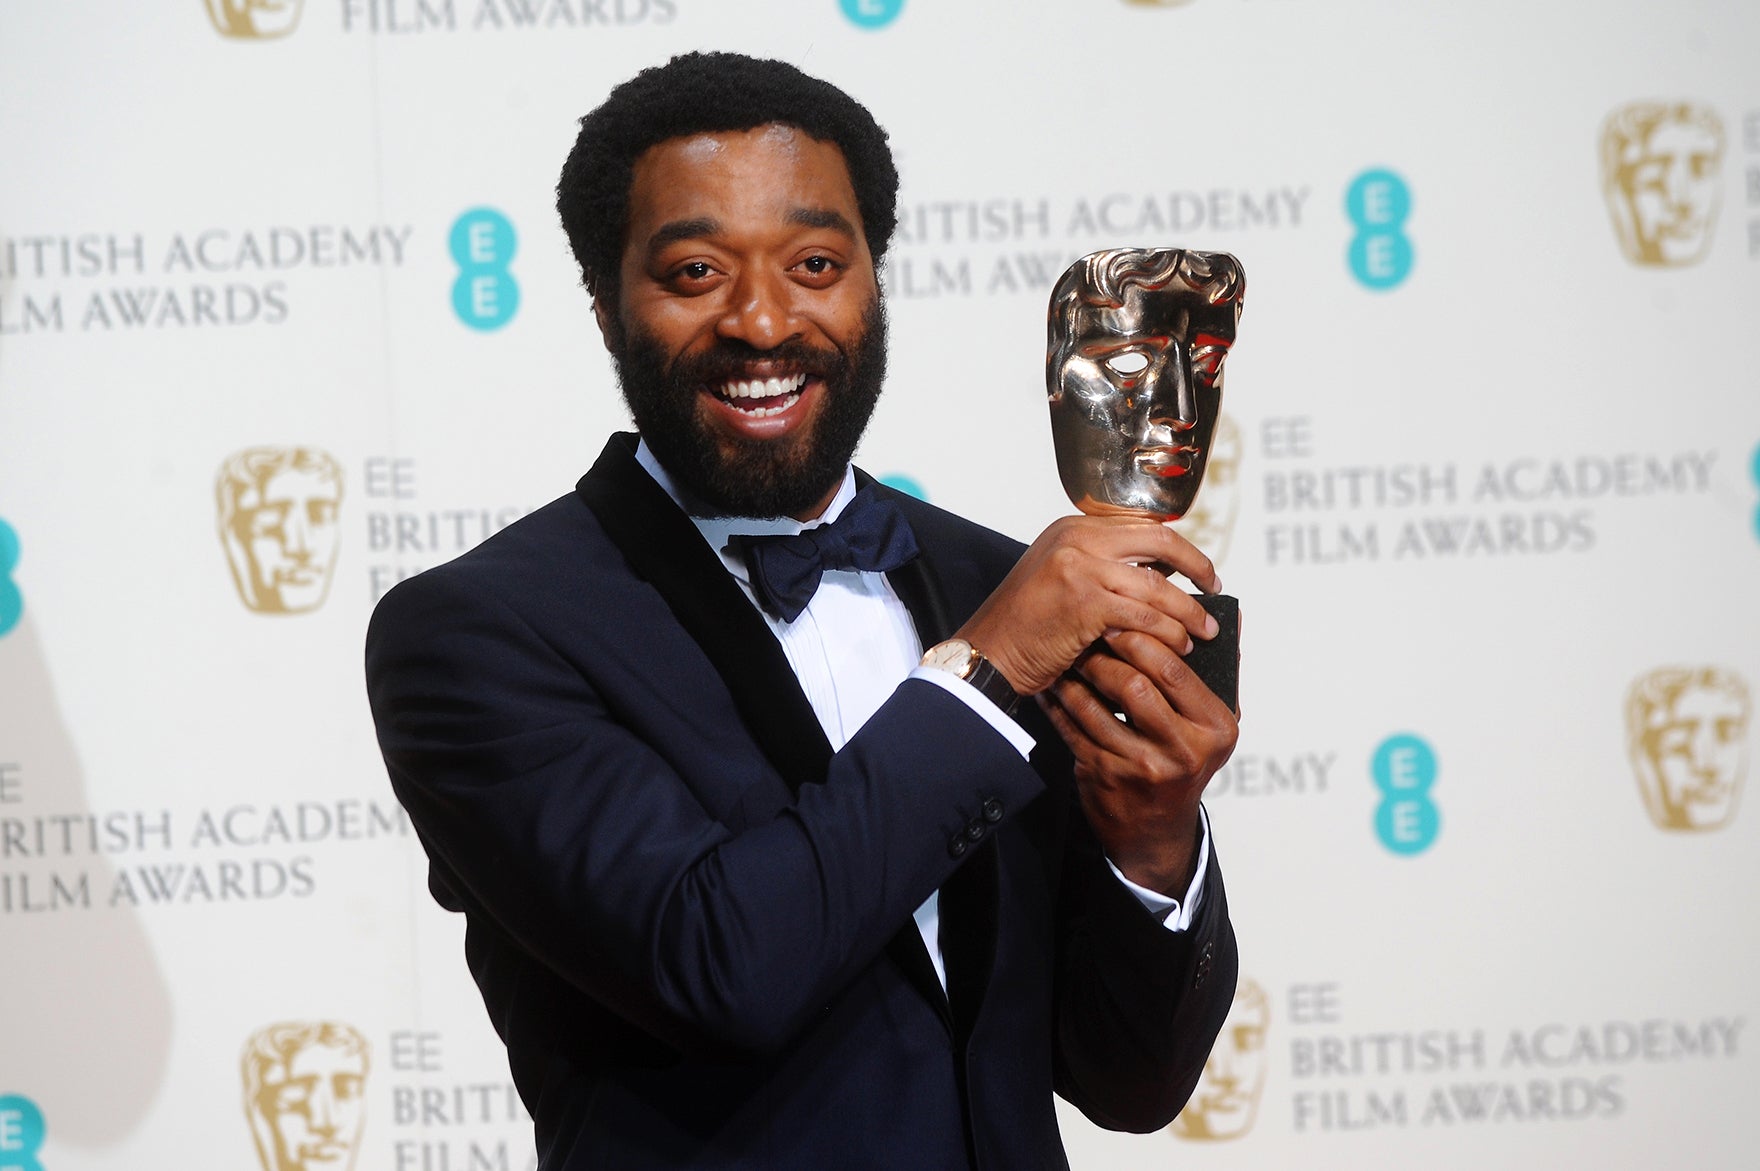 '12 Years a Slave' Wins Best Film at BAFTA Awards